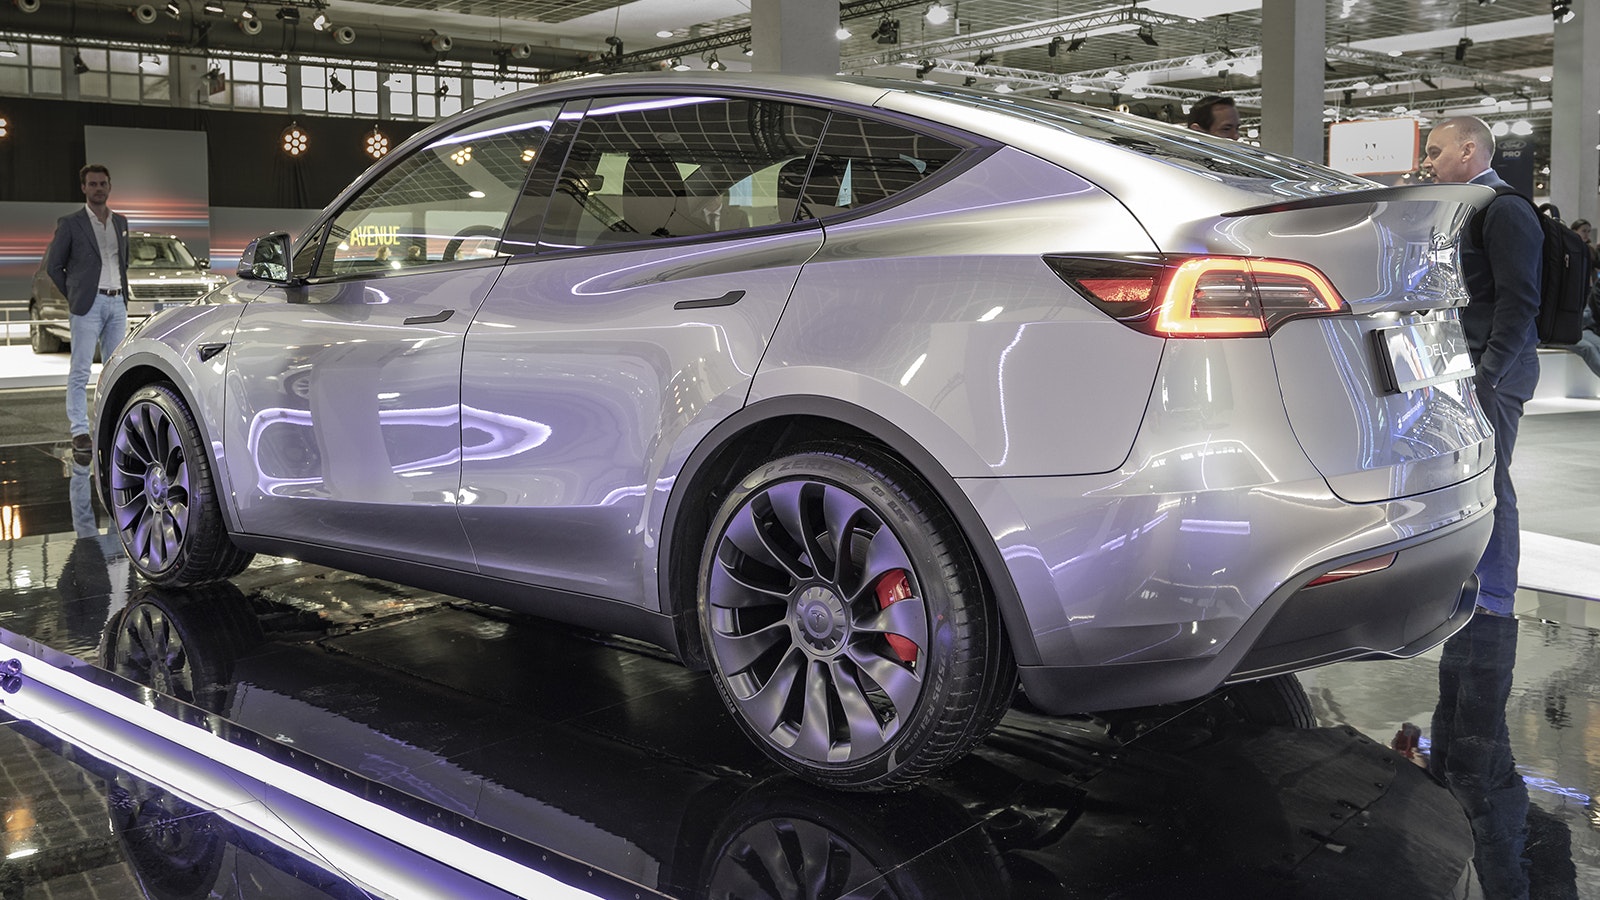 Teslas Are Now Priced Less Than Average American Car And Truck